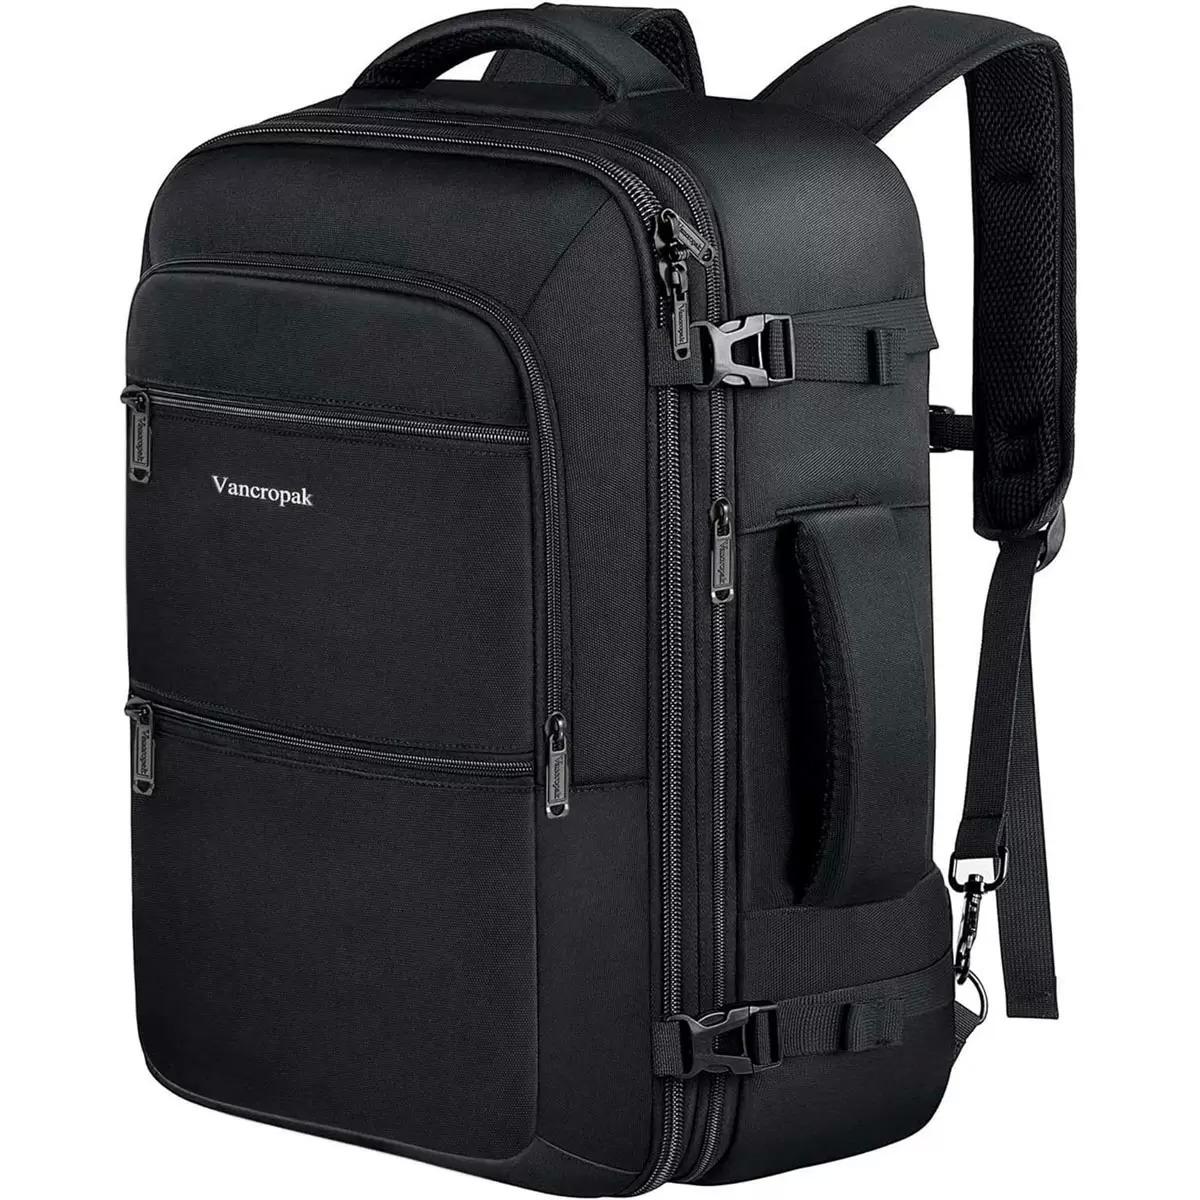 40L Vancropak Expandable X-Large Travel Carry On Backpack for $31.99 Shipped